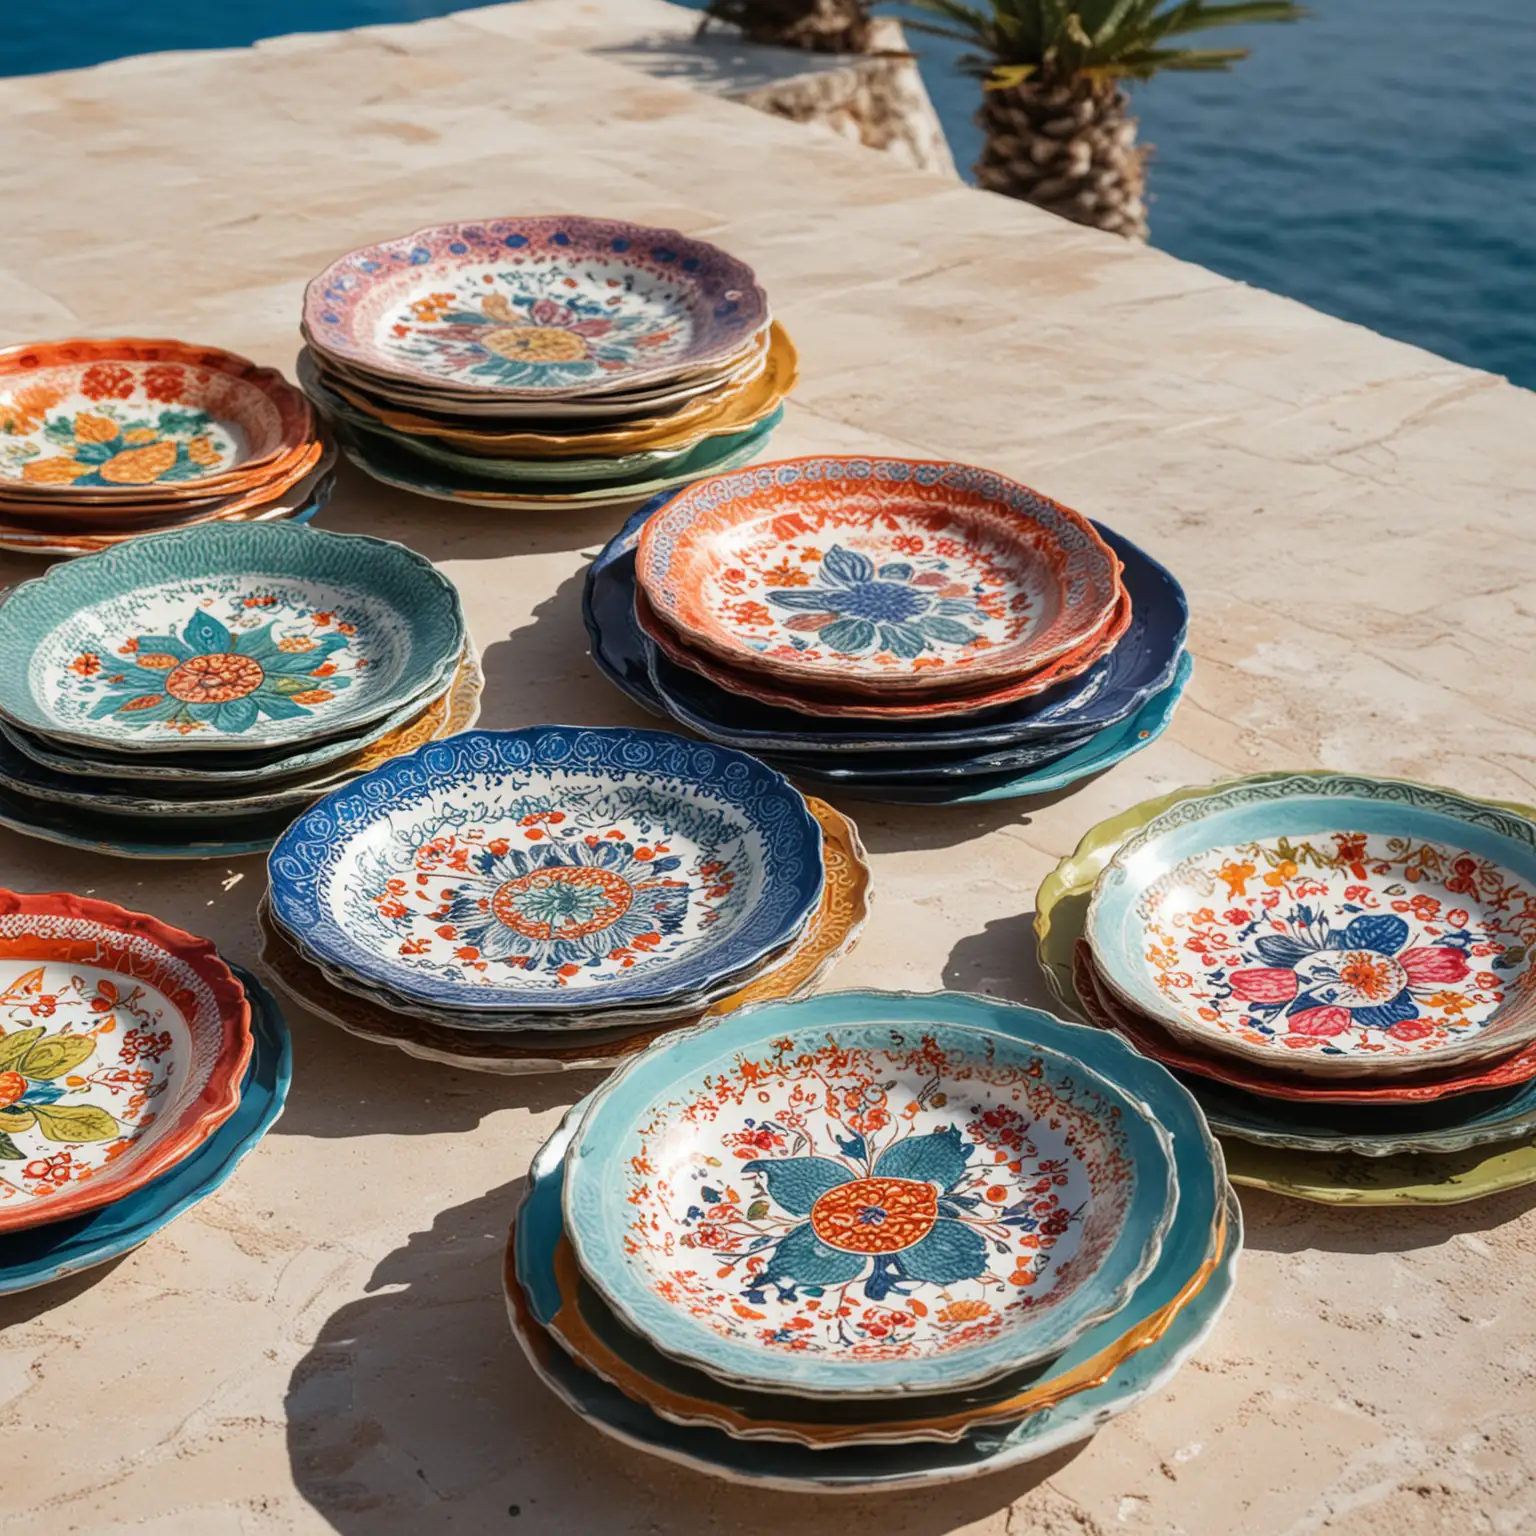 a luxury Villa in the Meditteranean Sea showing a close up of 6 colourful plates